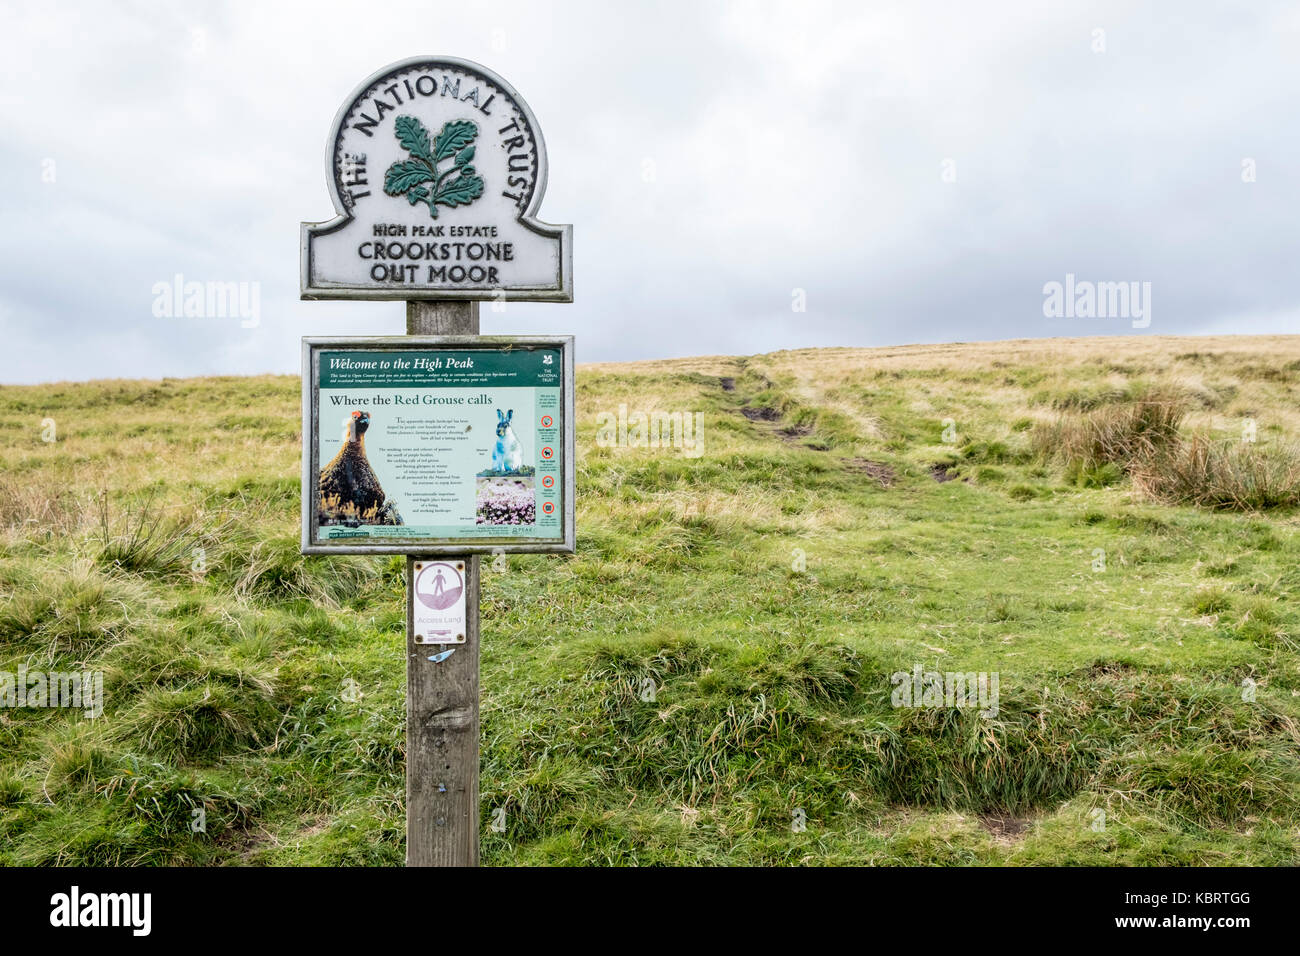 National Trust information sign on Crookstone Out Moor, Derbyshire, Peak District National Park, England, UK Stock Photo